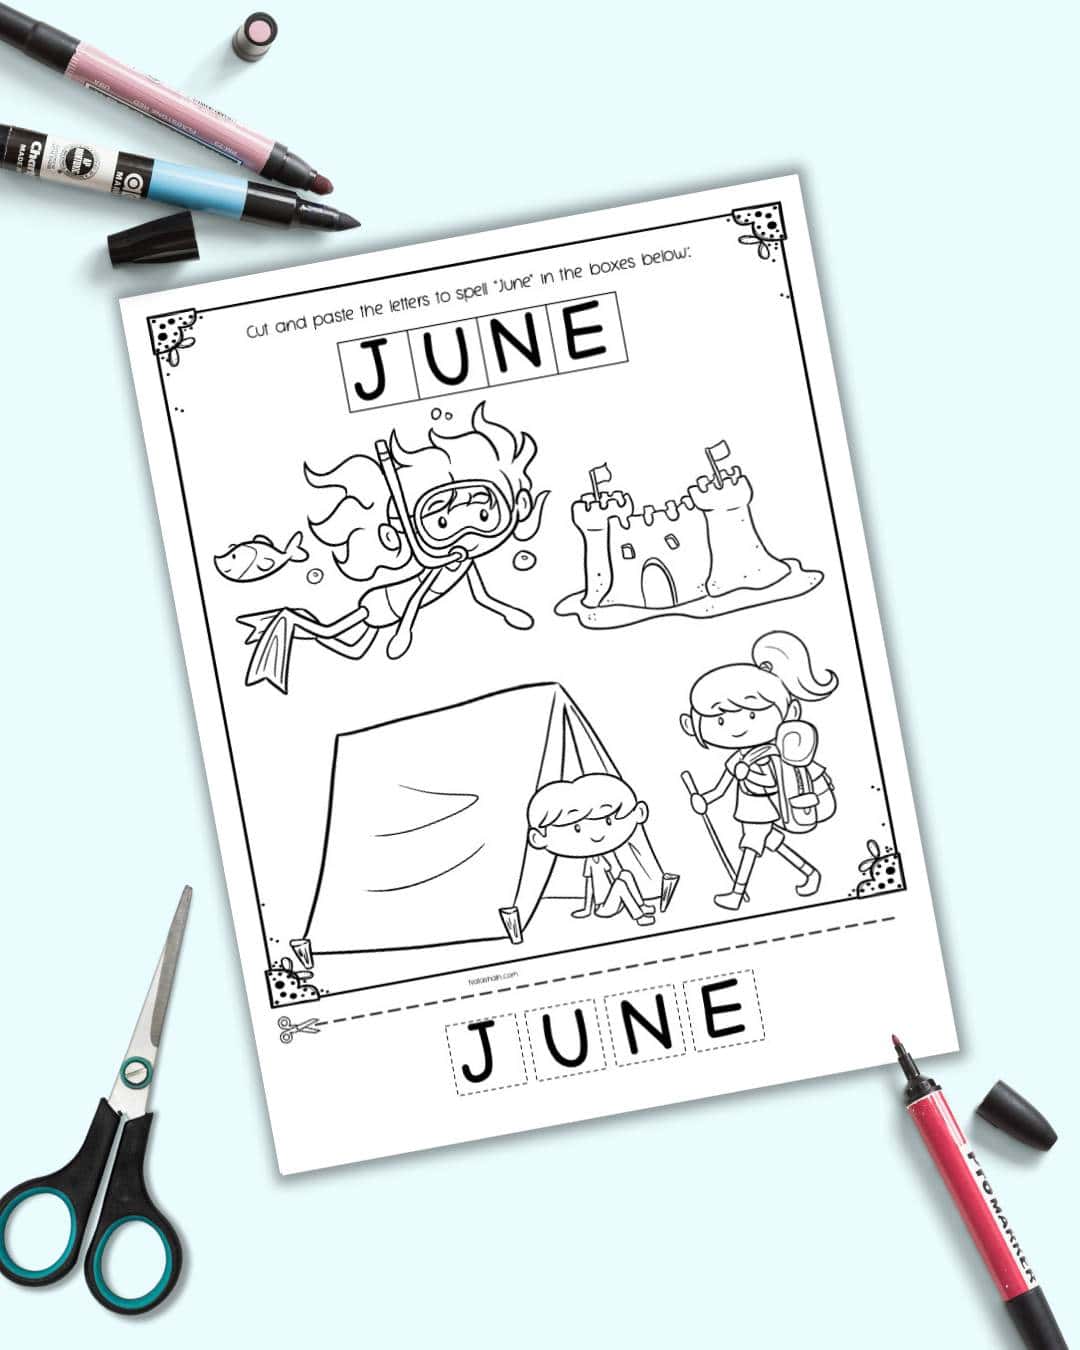 A preview of a coloring page with the letters for JUNE to cut and paste with a pair of scissors and markers